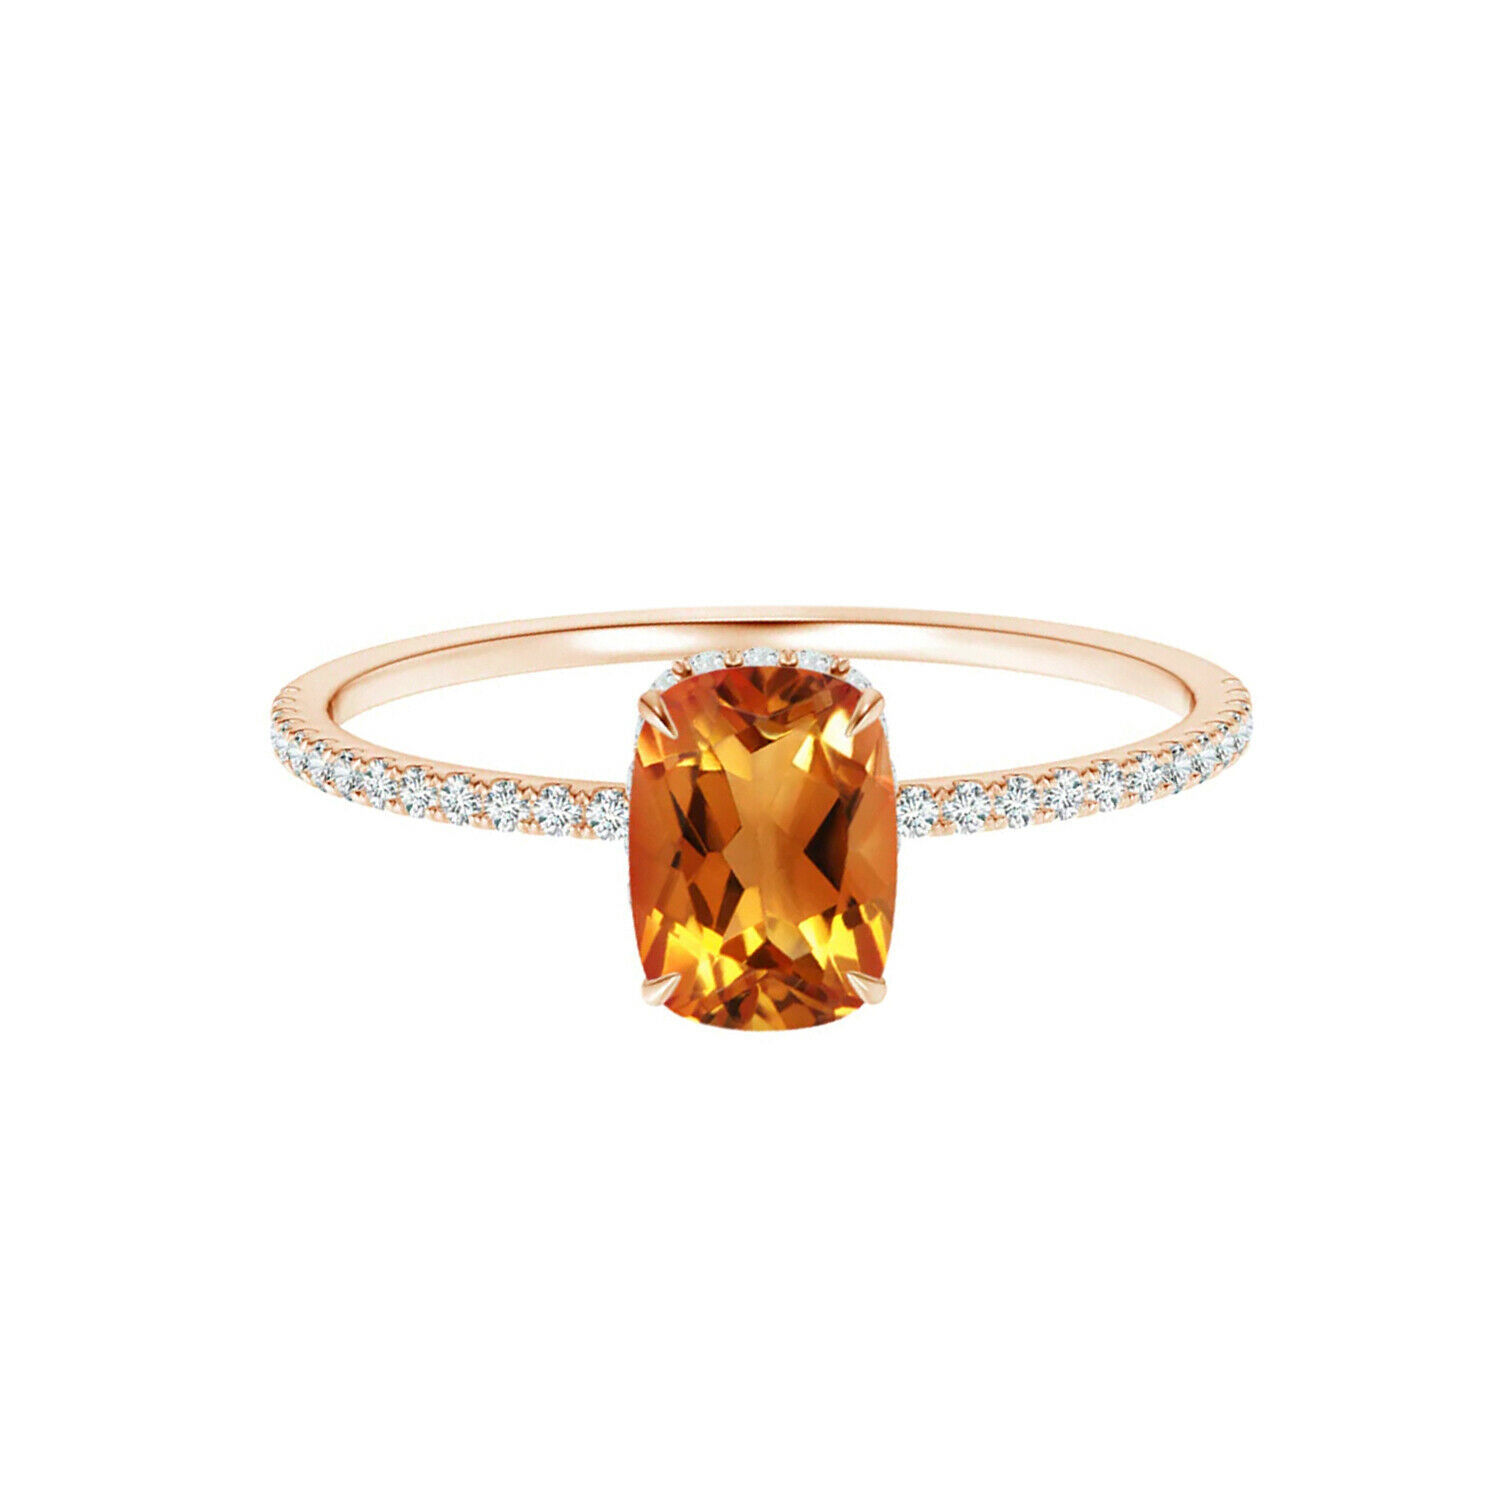 1.30 Cts Cushion Cut Citrine 9K Rose Gold Think Shank Stackable Ring